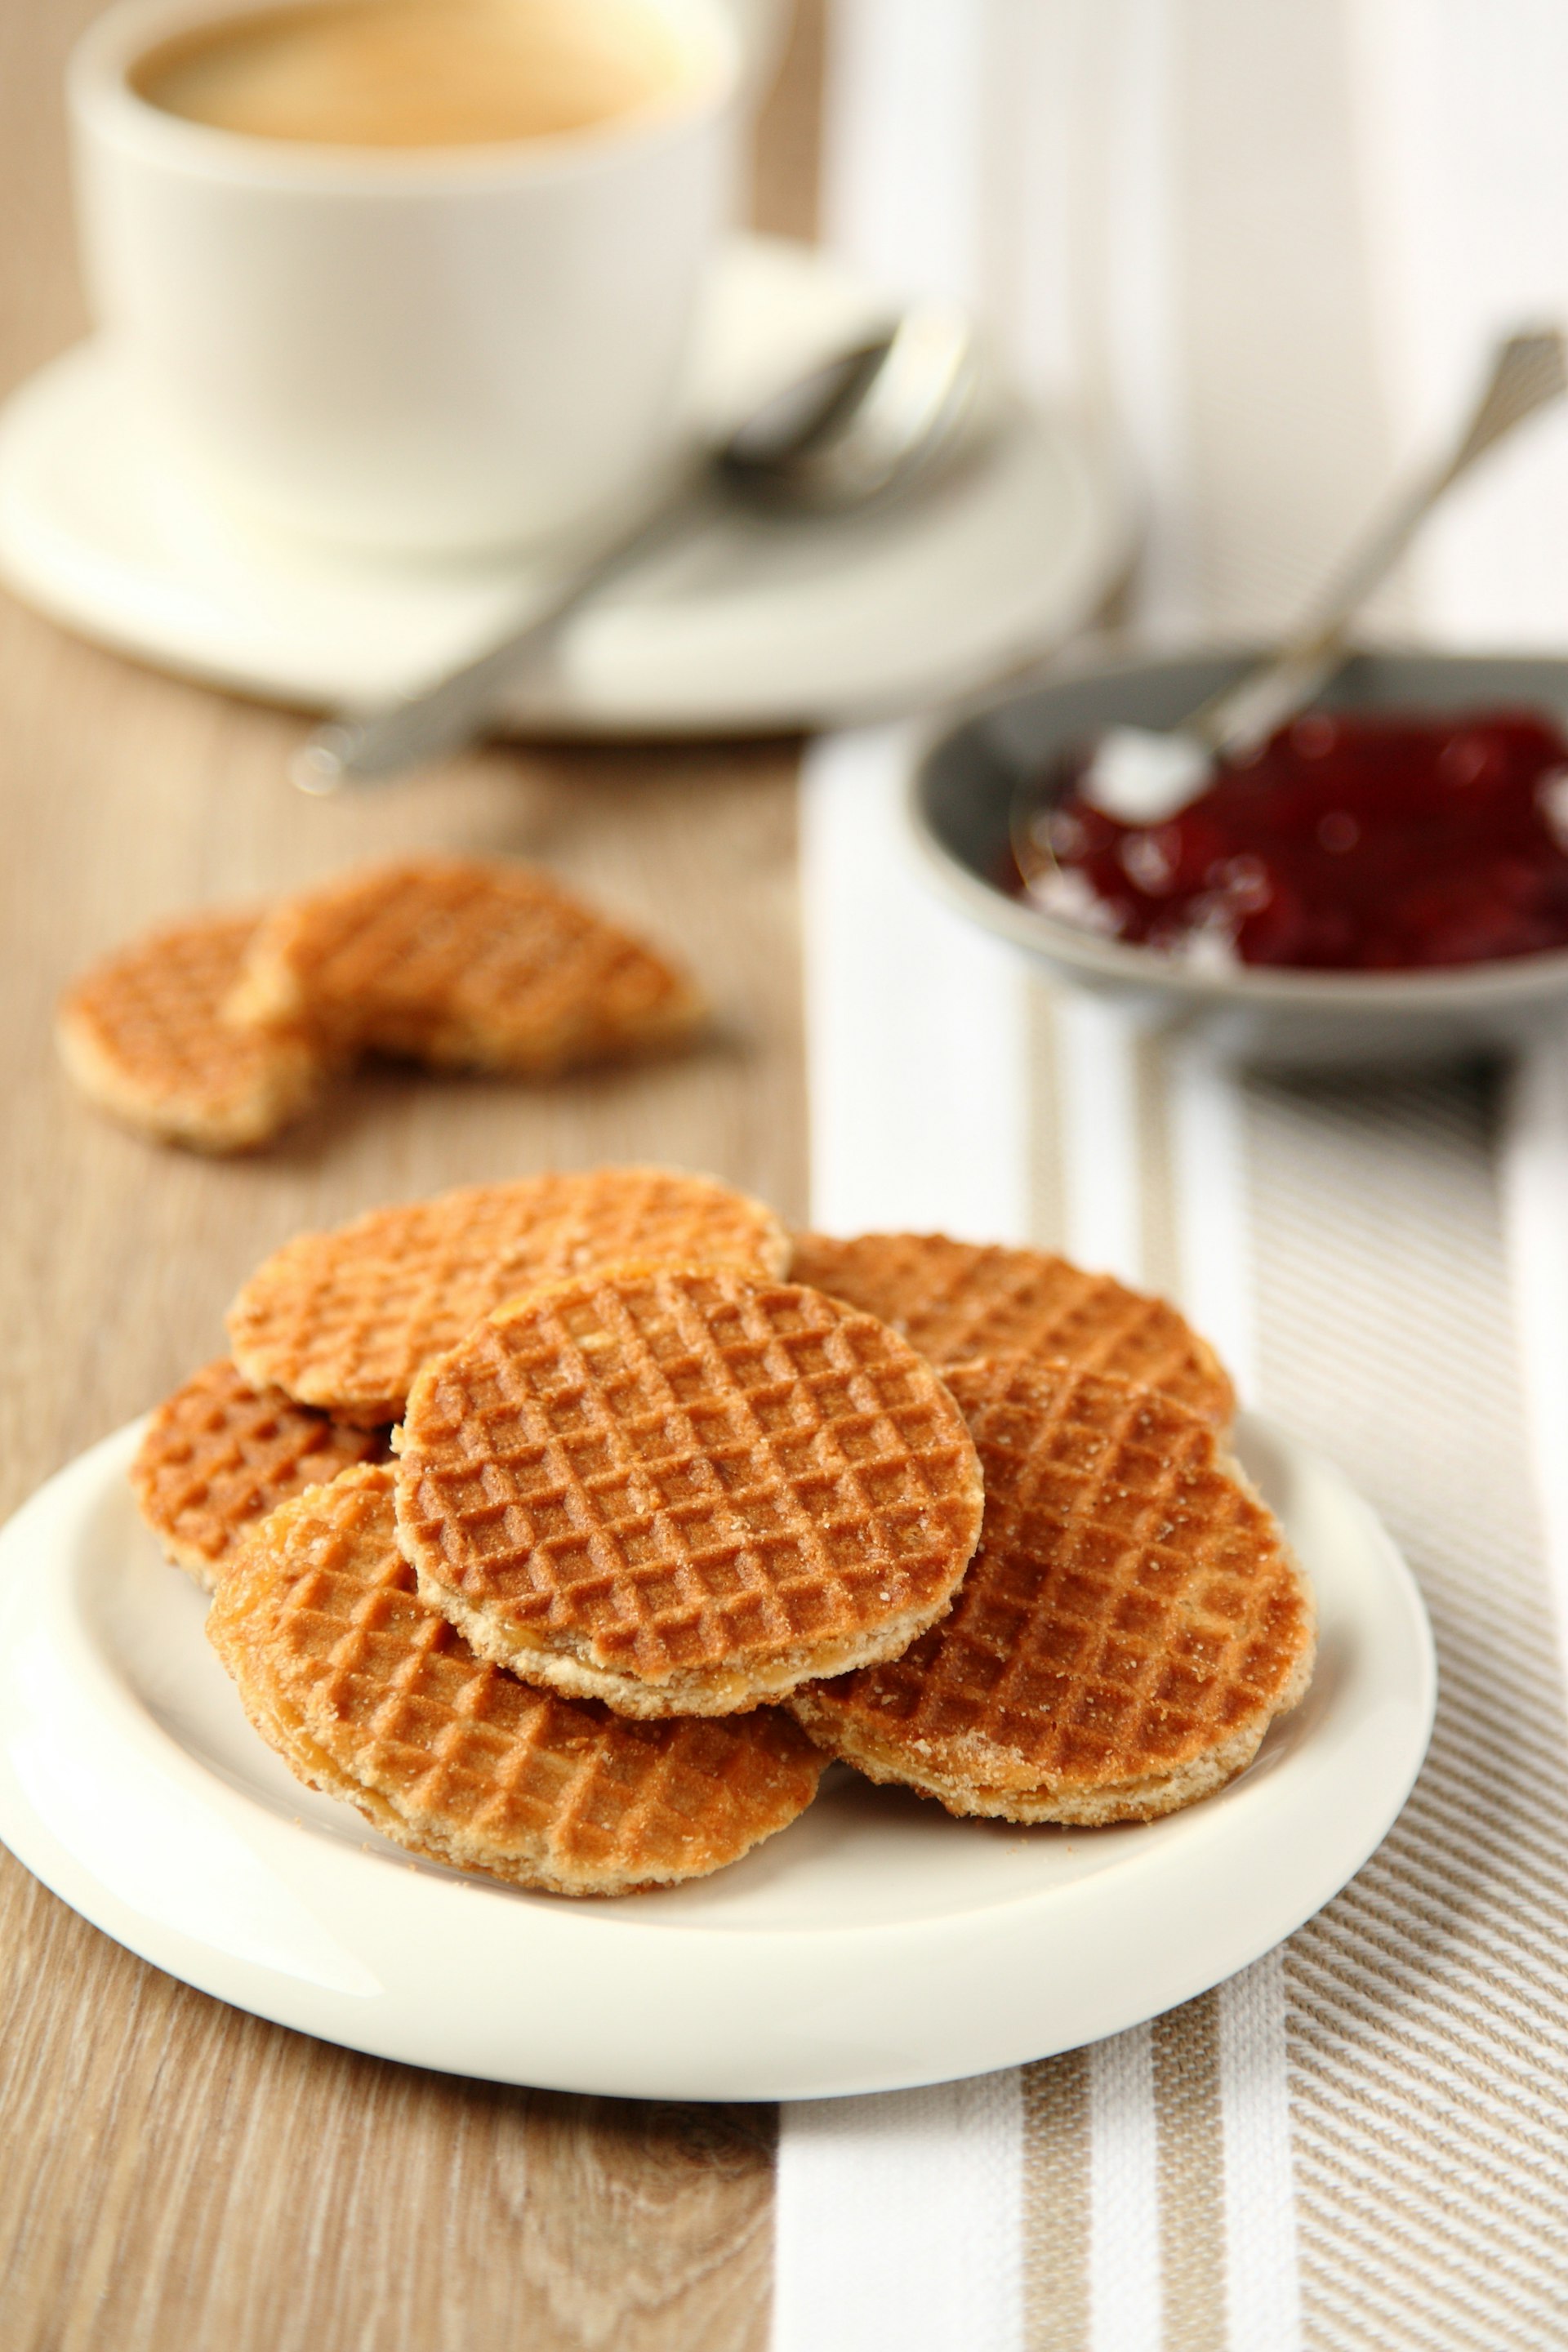 Mini stroopwafels (syrupwaffles) on a plate with cup of coffee and jam